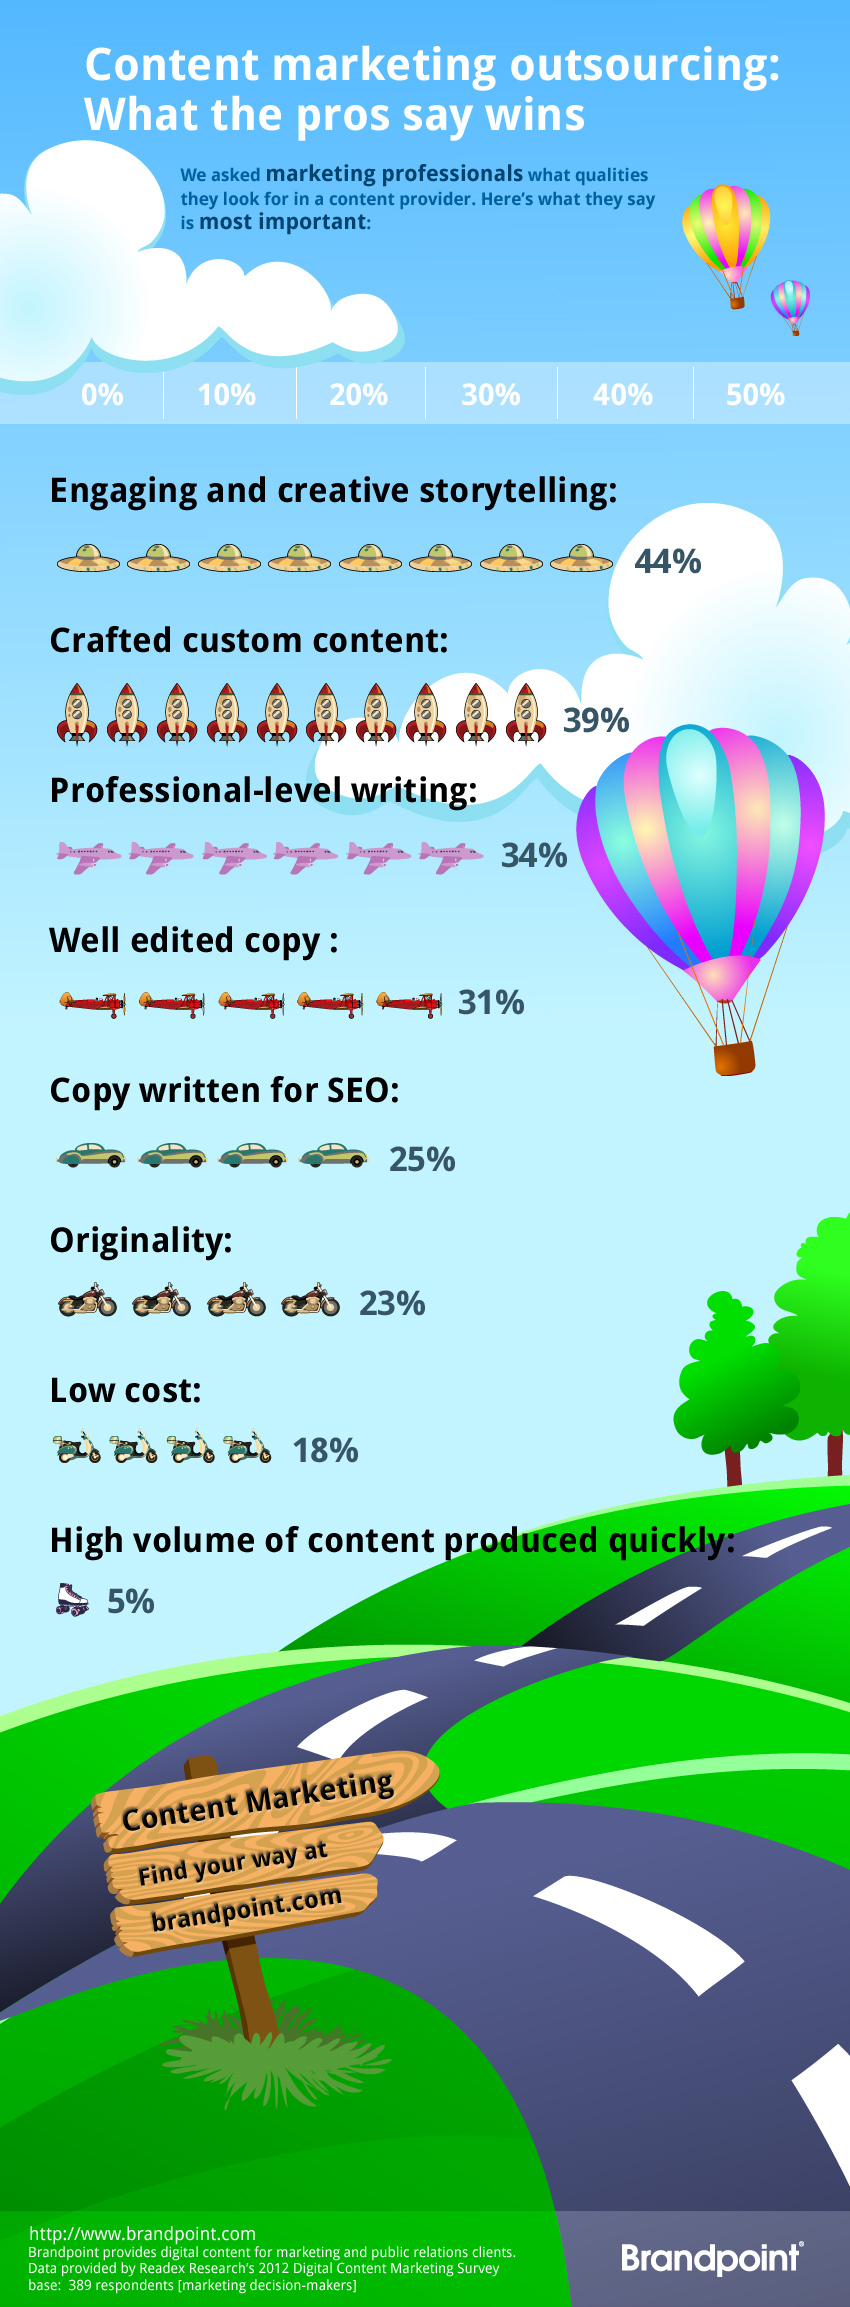 Content marketing Outsourcing: What the pros say wins - Brandpoint Infographic